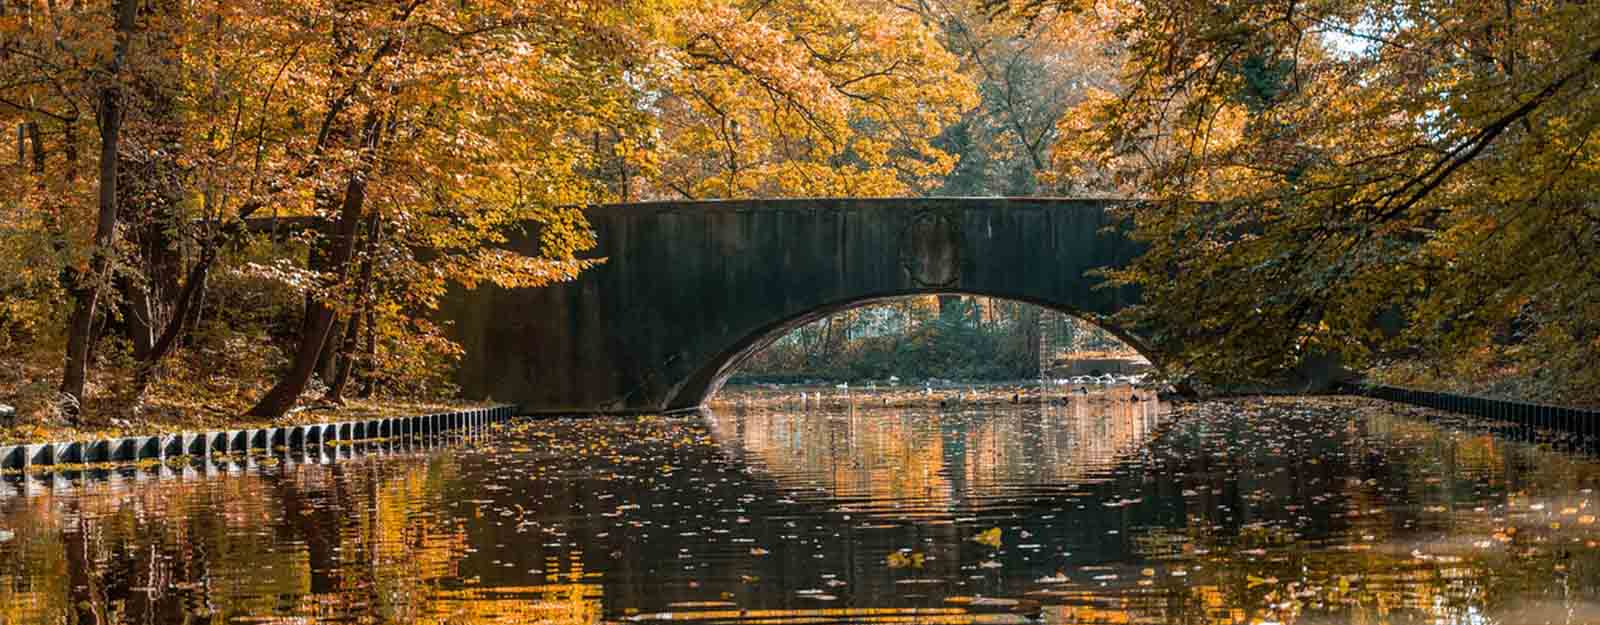 Photo of a concrete arched bridge surrounded by trees in the Fall.